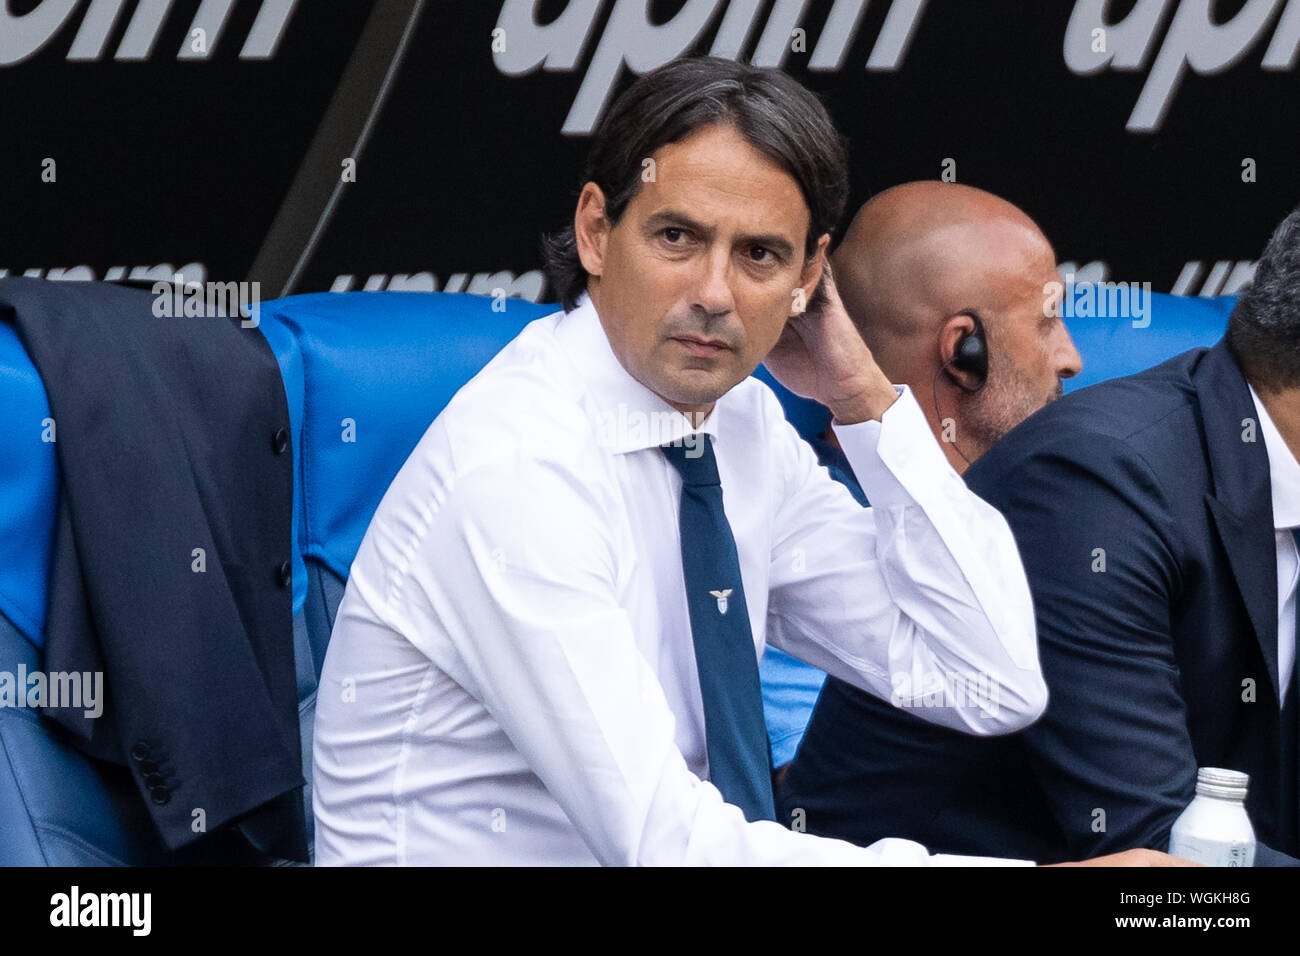 Lazio coach, Simone Inzaghi looks on during the Serie A match between Lazio and AS Roma at Olimpico Stadium.(Final score: Lazio 1:1 AS Roma) Stock Photo